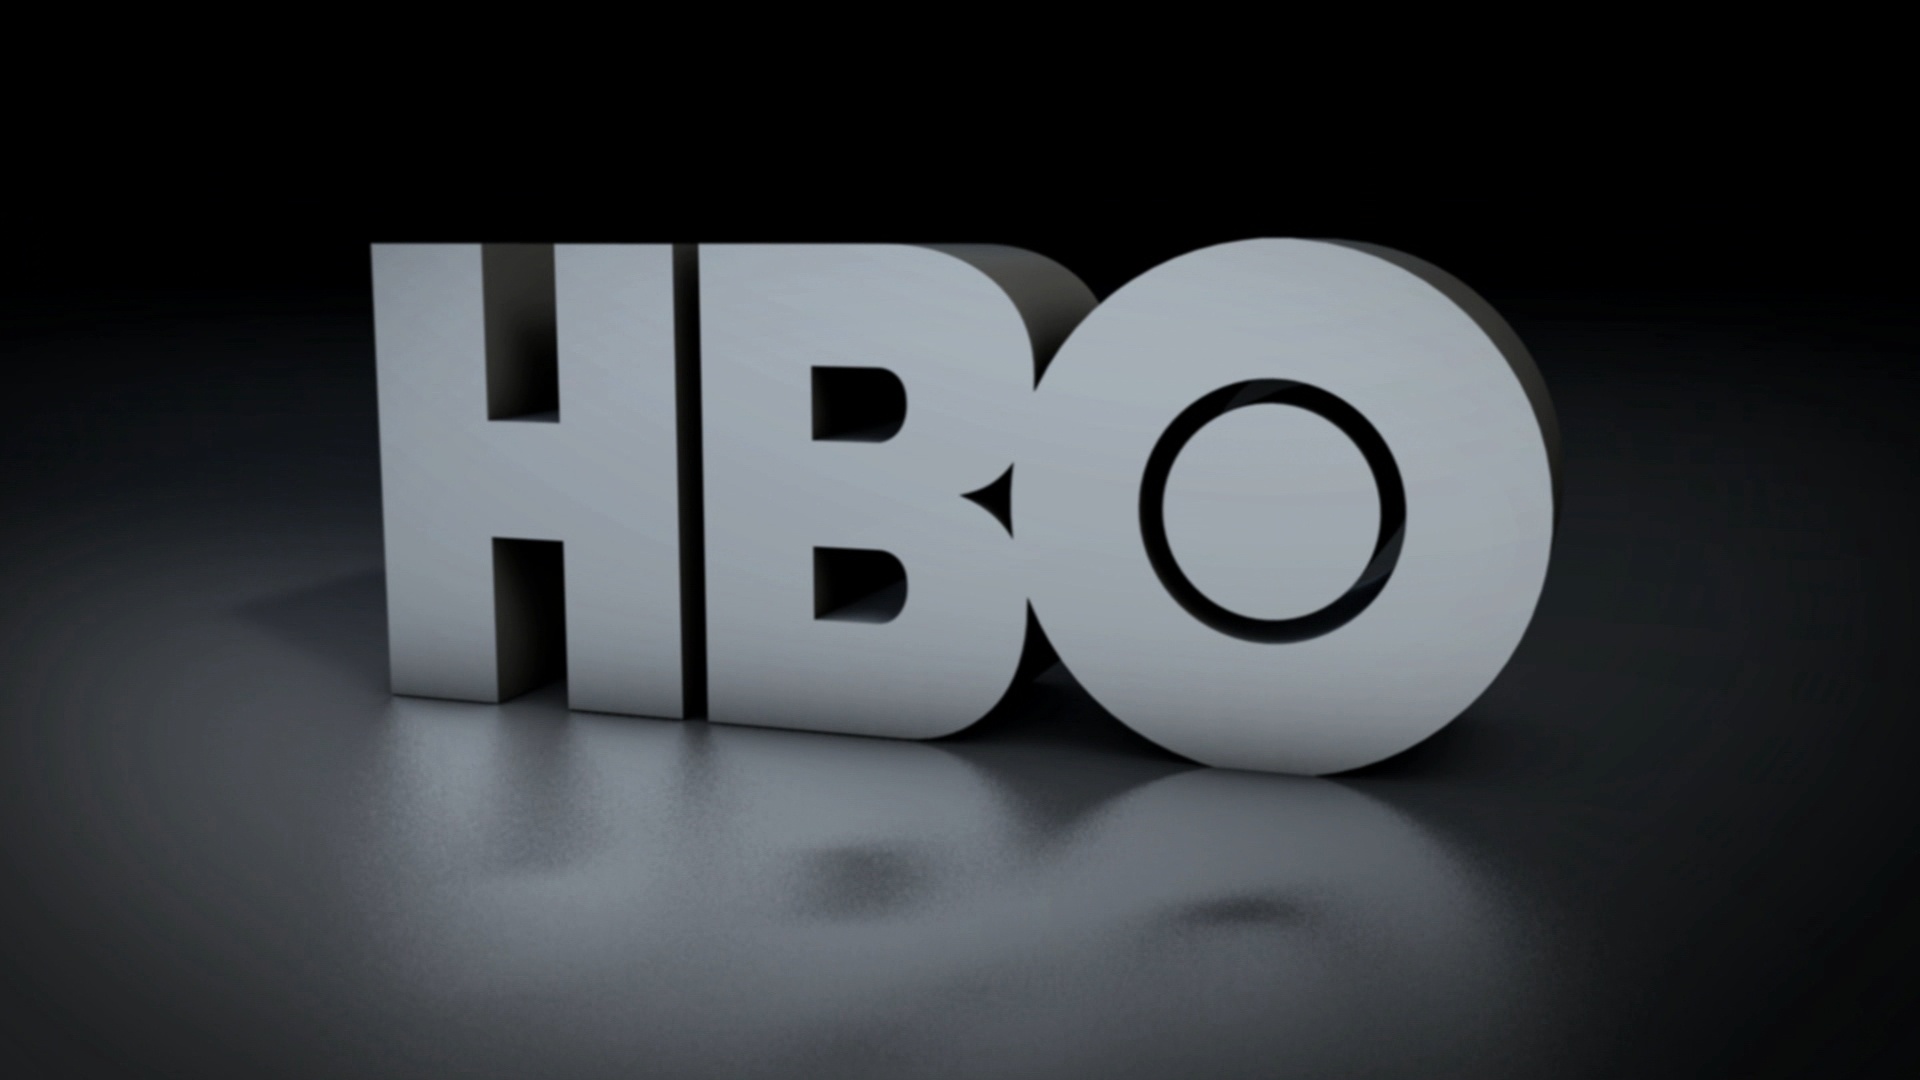 HBO: The network operating seven 24-hour, linear multiplex channels, Monochrome. 1920x1080 Full HD Background.